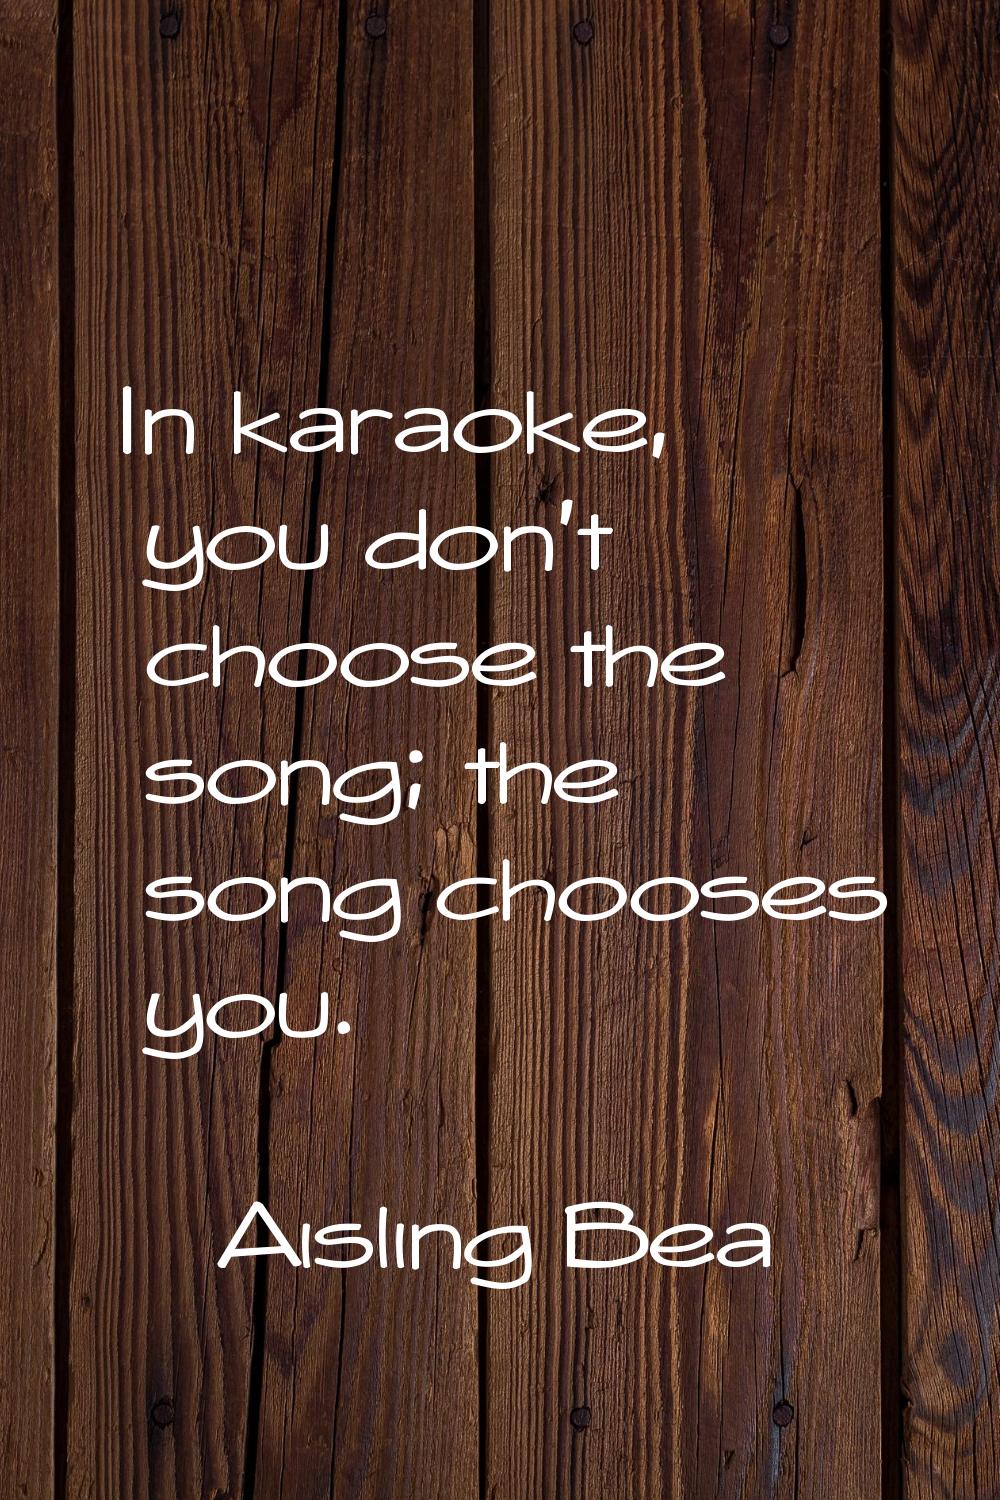 In karaoke, you don't choose the song; the song chooses you.